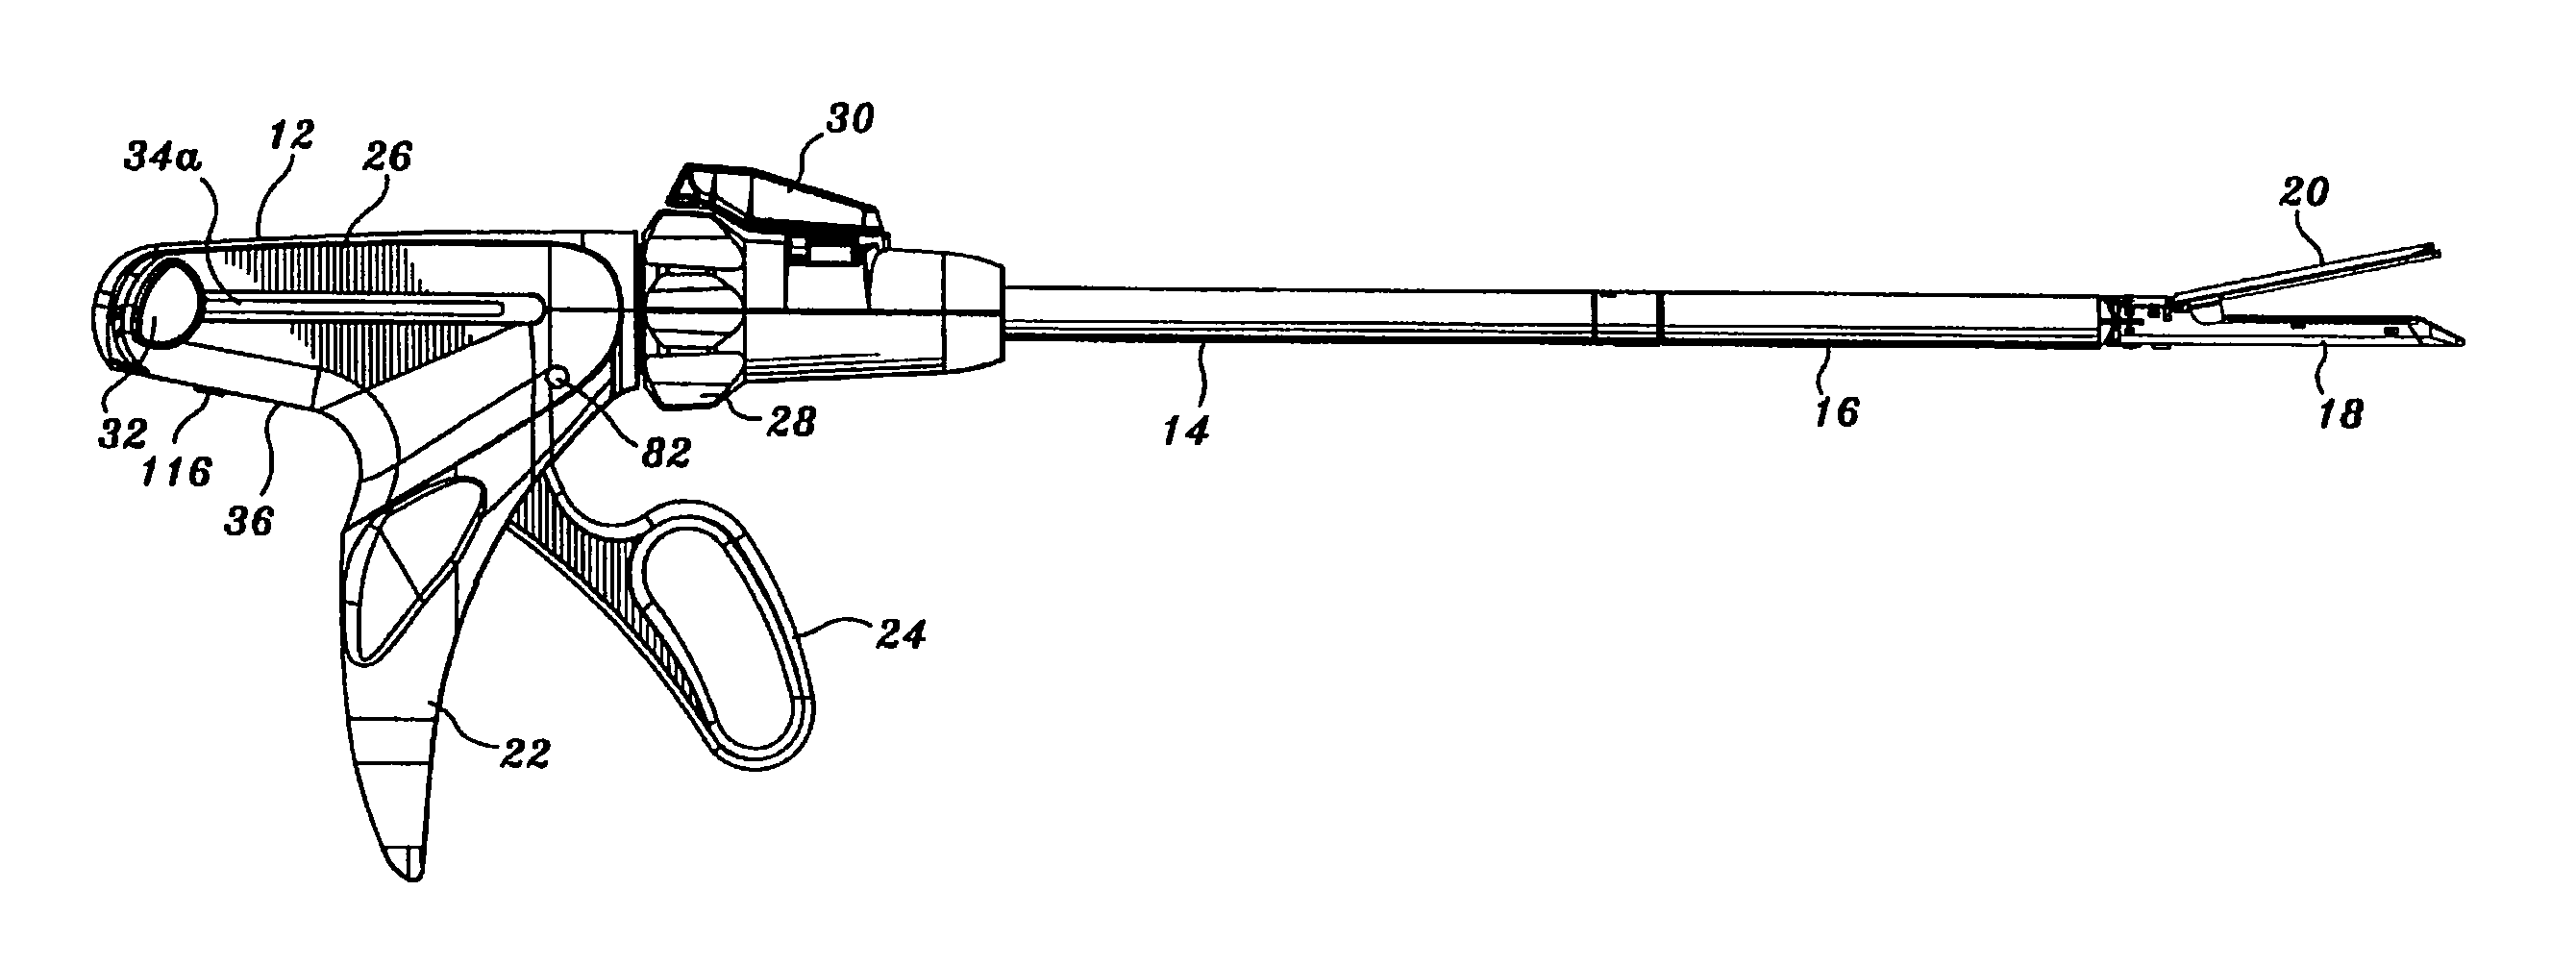 Closure systems for a surgical cutting and stapling instrument